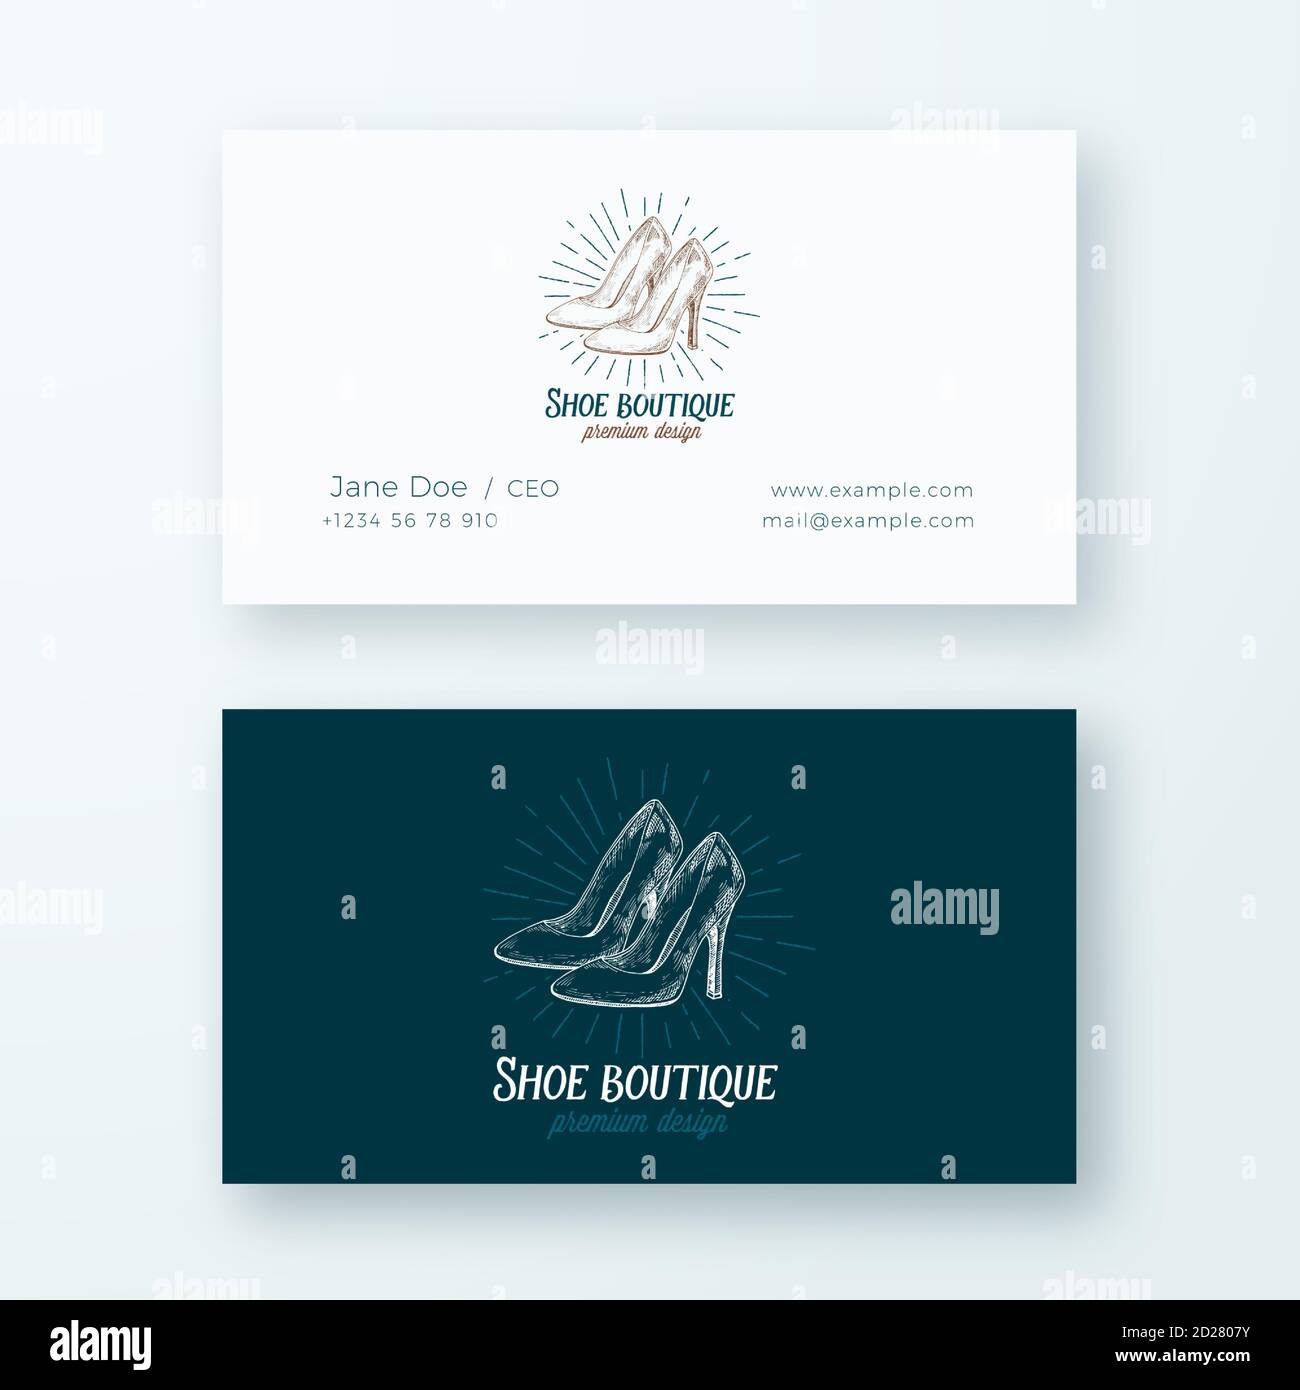 Shoe Boutique Abstract Vector Logo and Business Card Template Regarding High Heel Shoe Template For Card